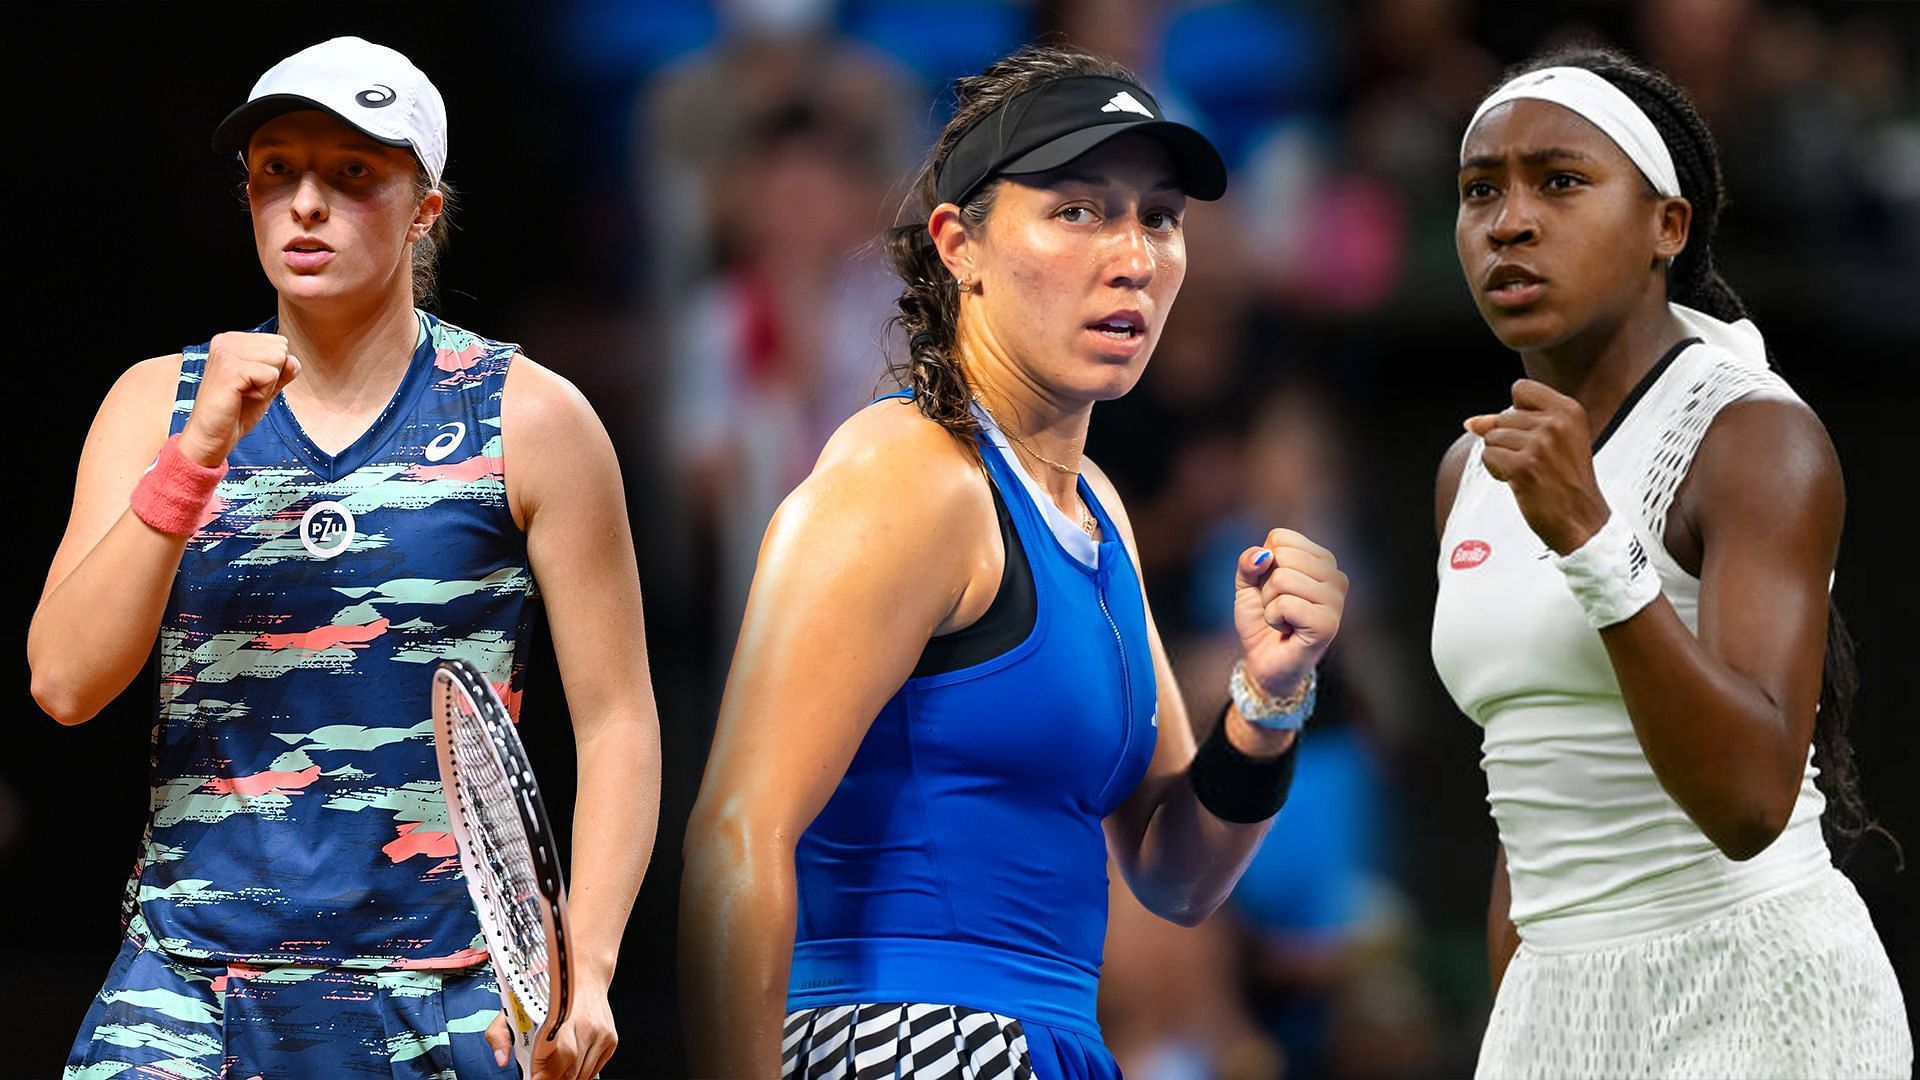 Why are Iga Swiatek, Coco Gauff and Jessica Pegula skipping the Billie Jean King Cup? The scheduling conflict that's forcing them to miss the event